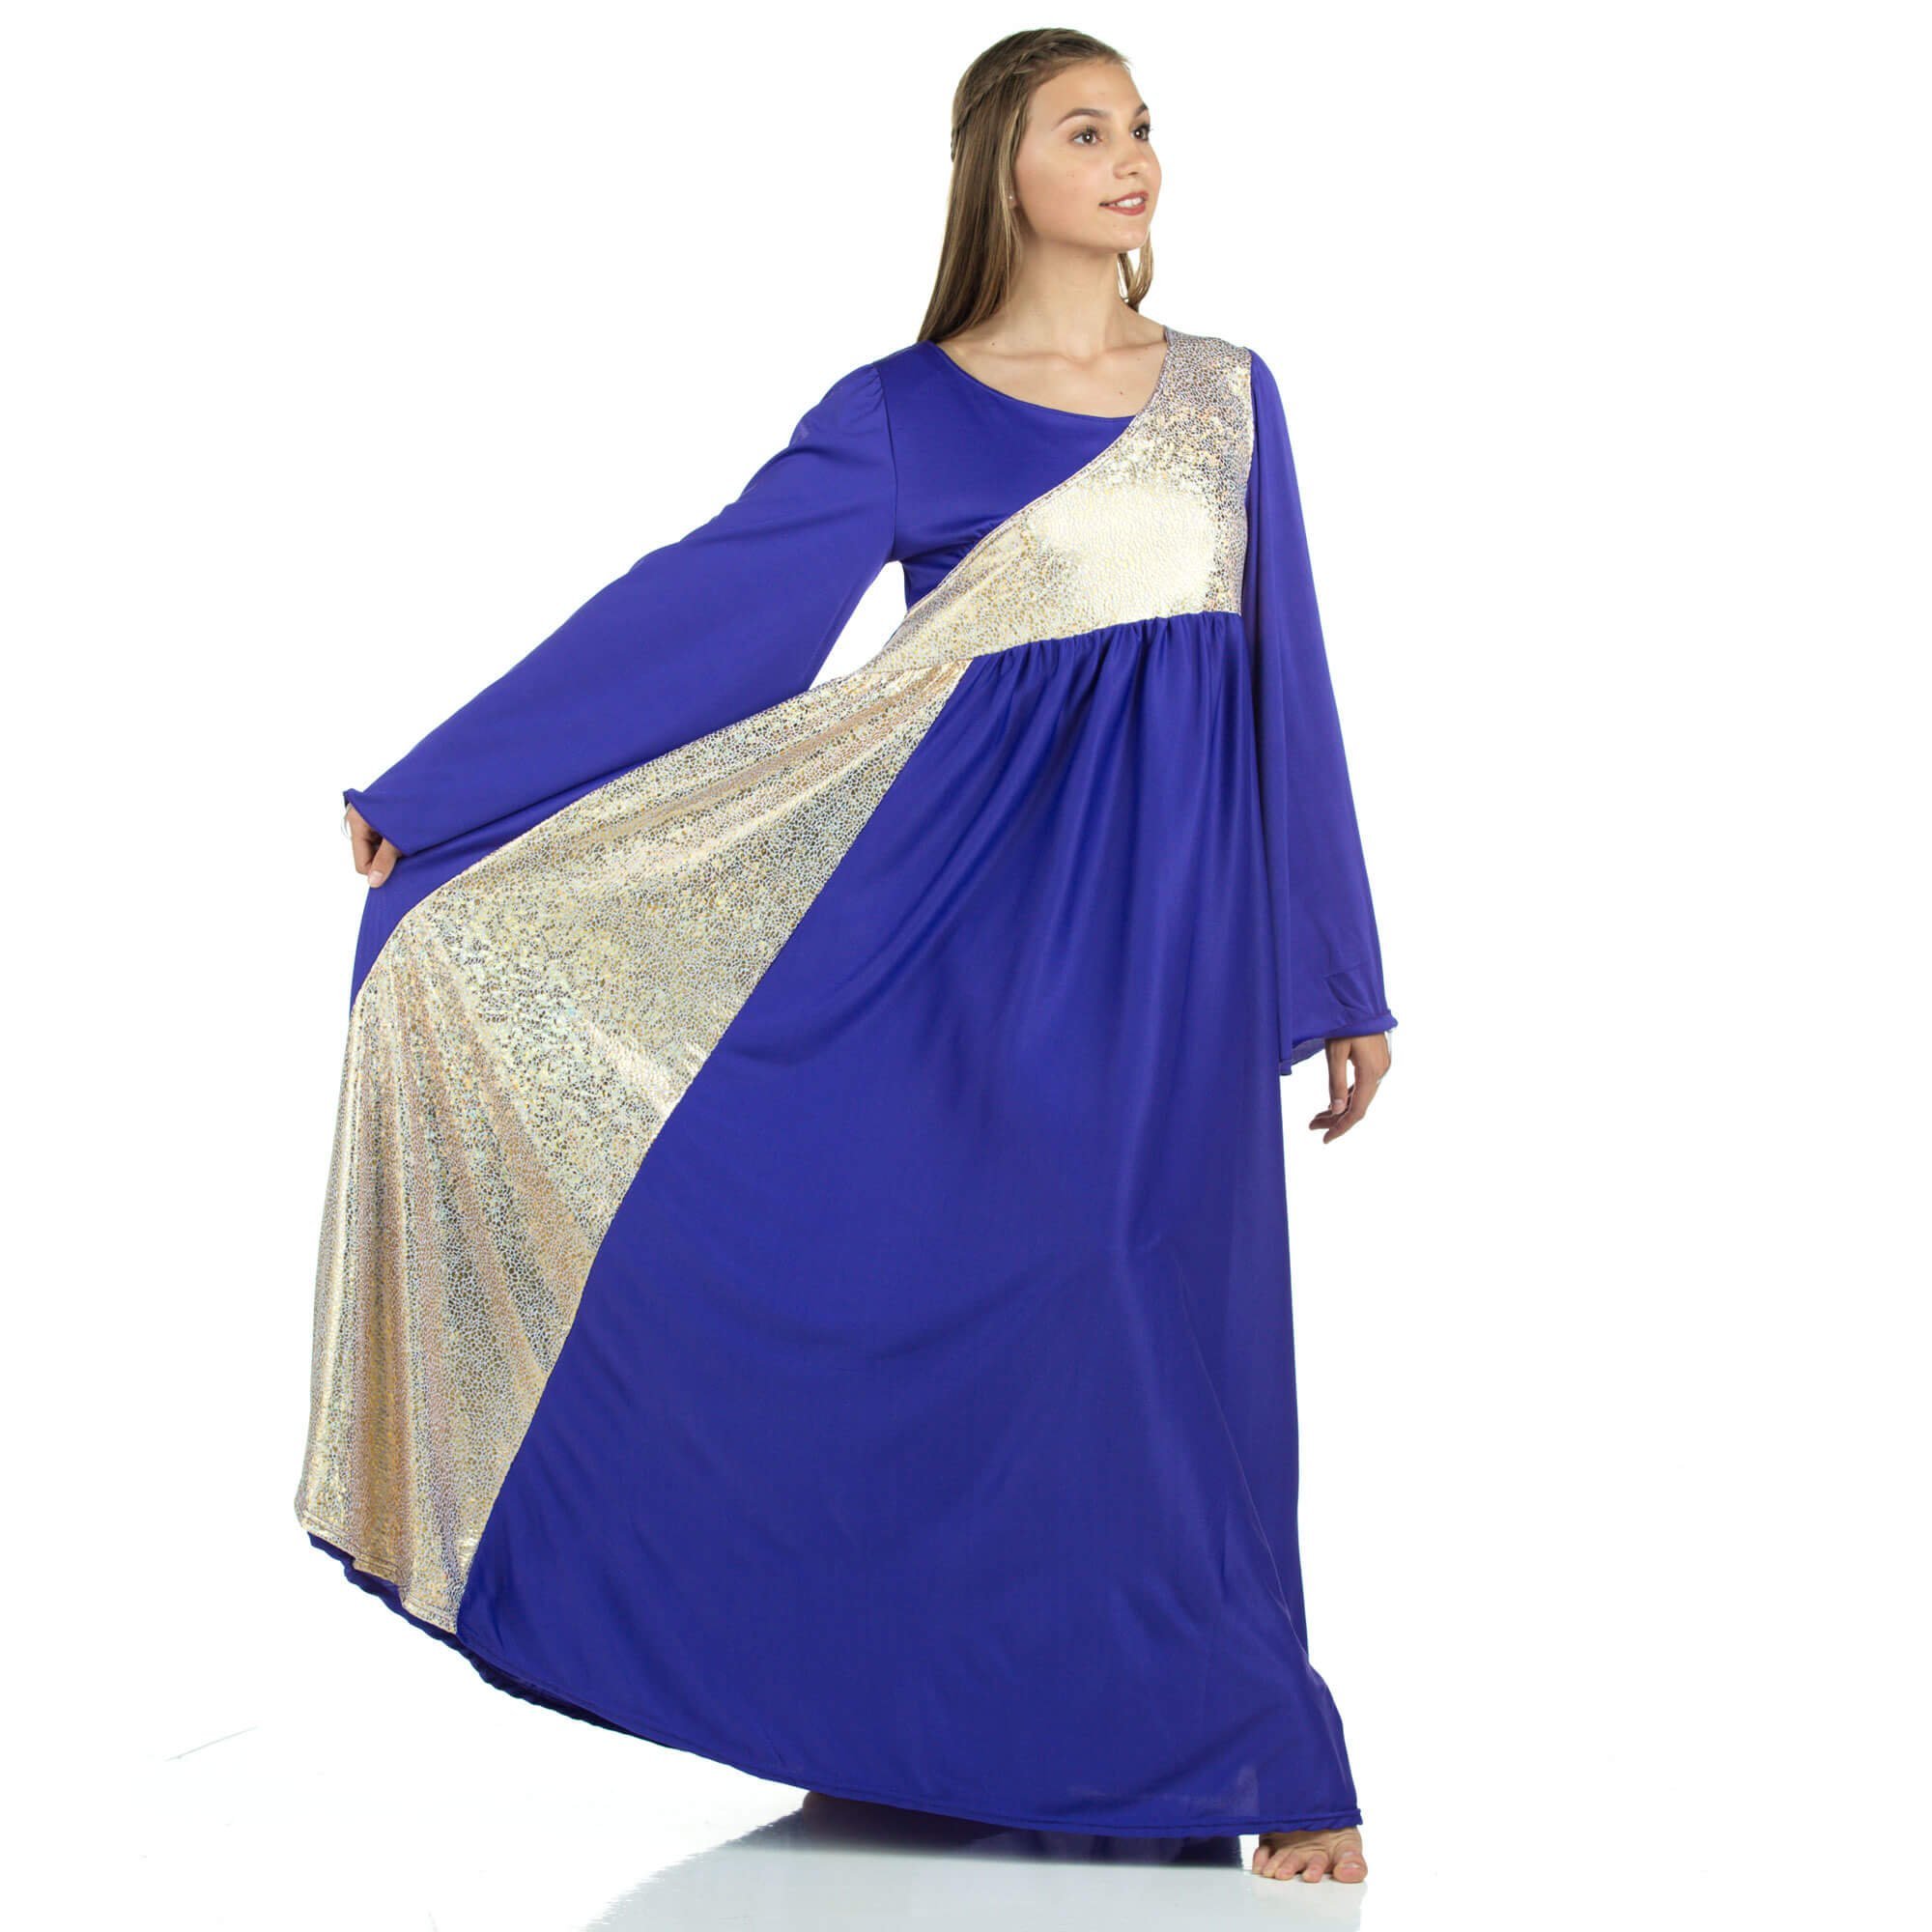 Danzcue Praise Dance Shimmery Asymmetrical Bell Sleeve Dress - Click Image to Close